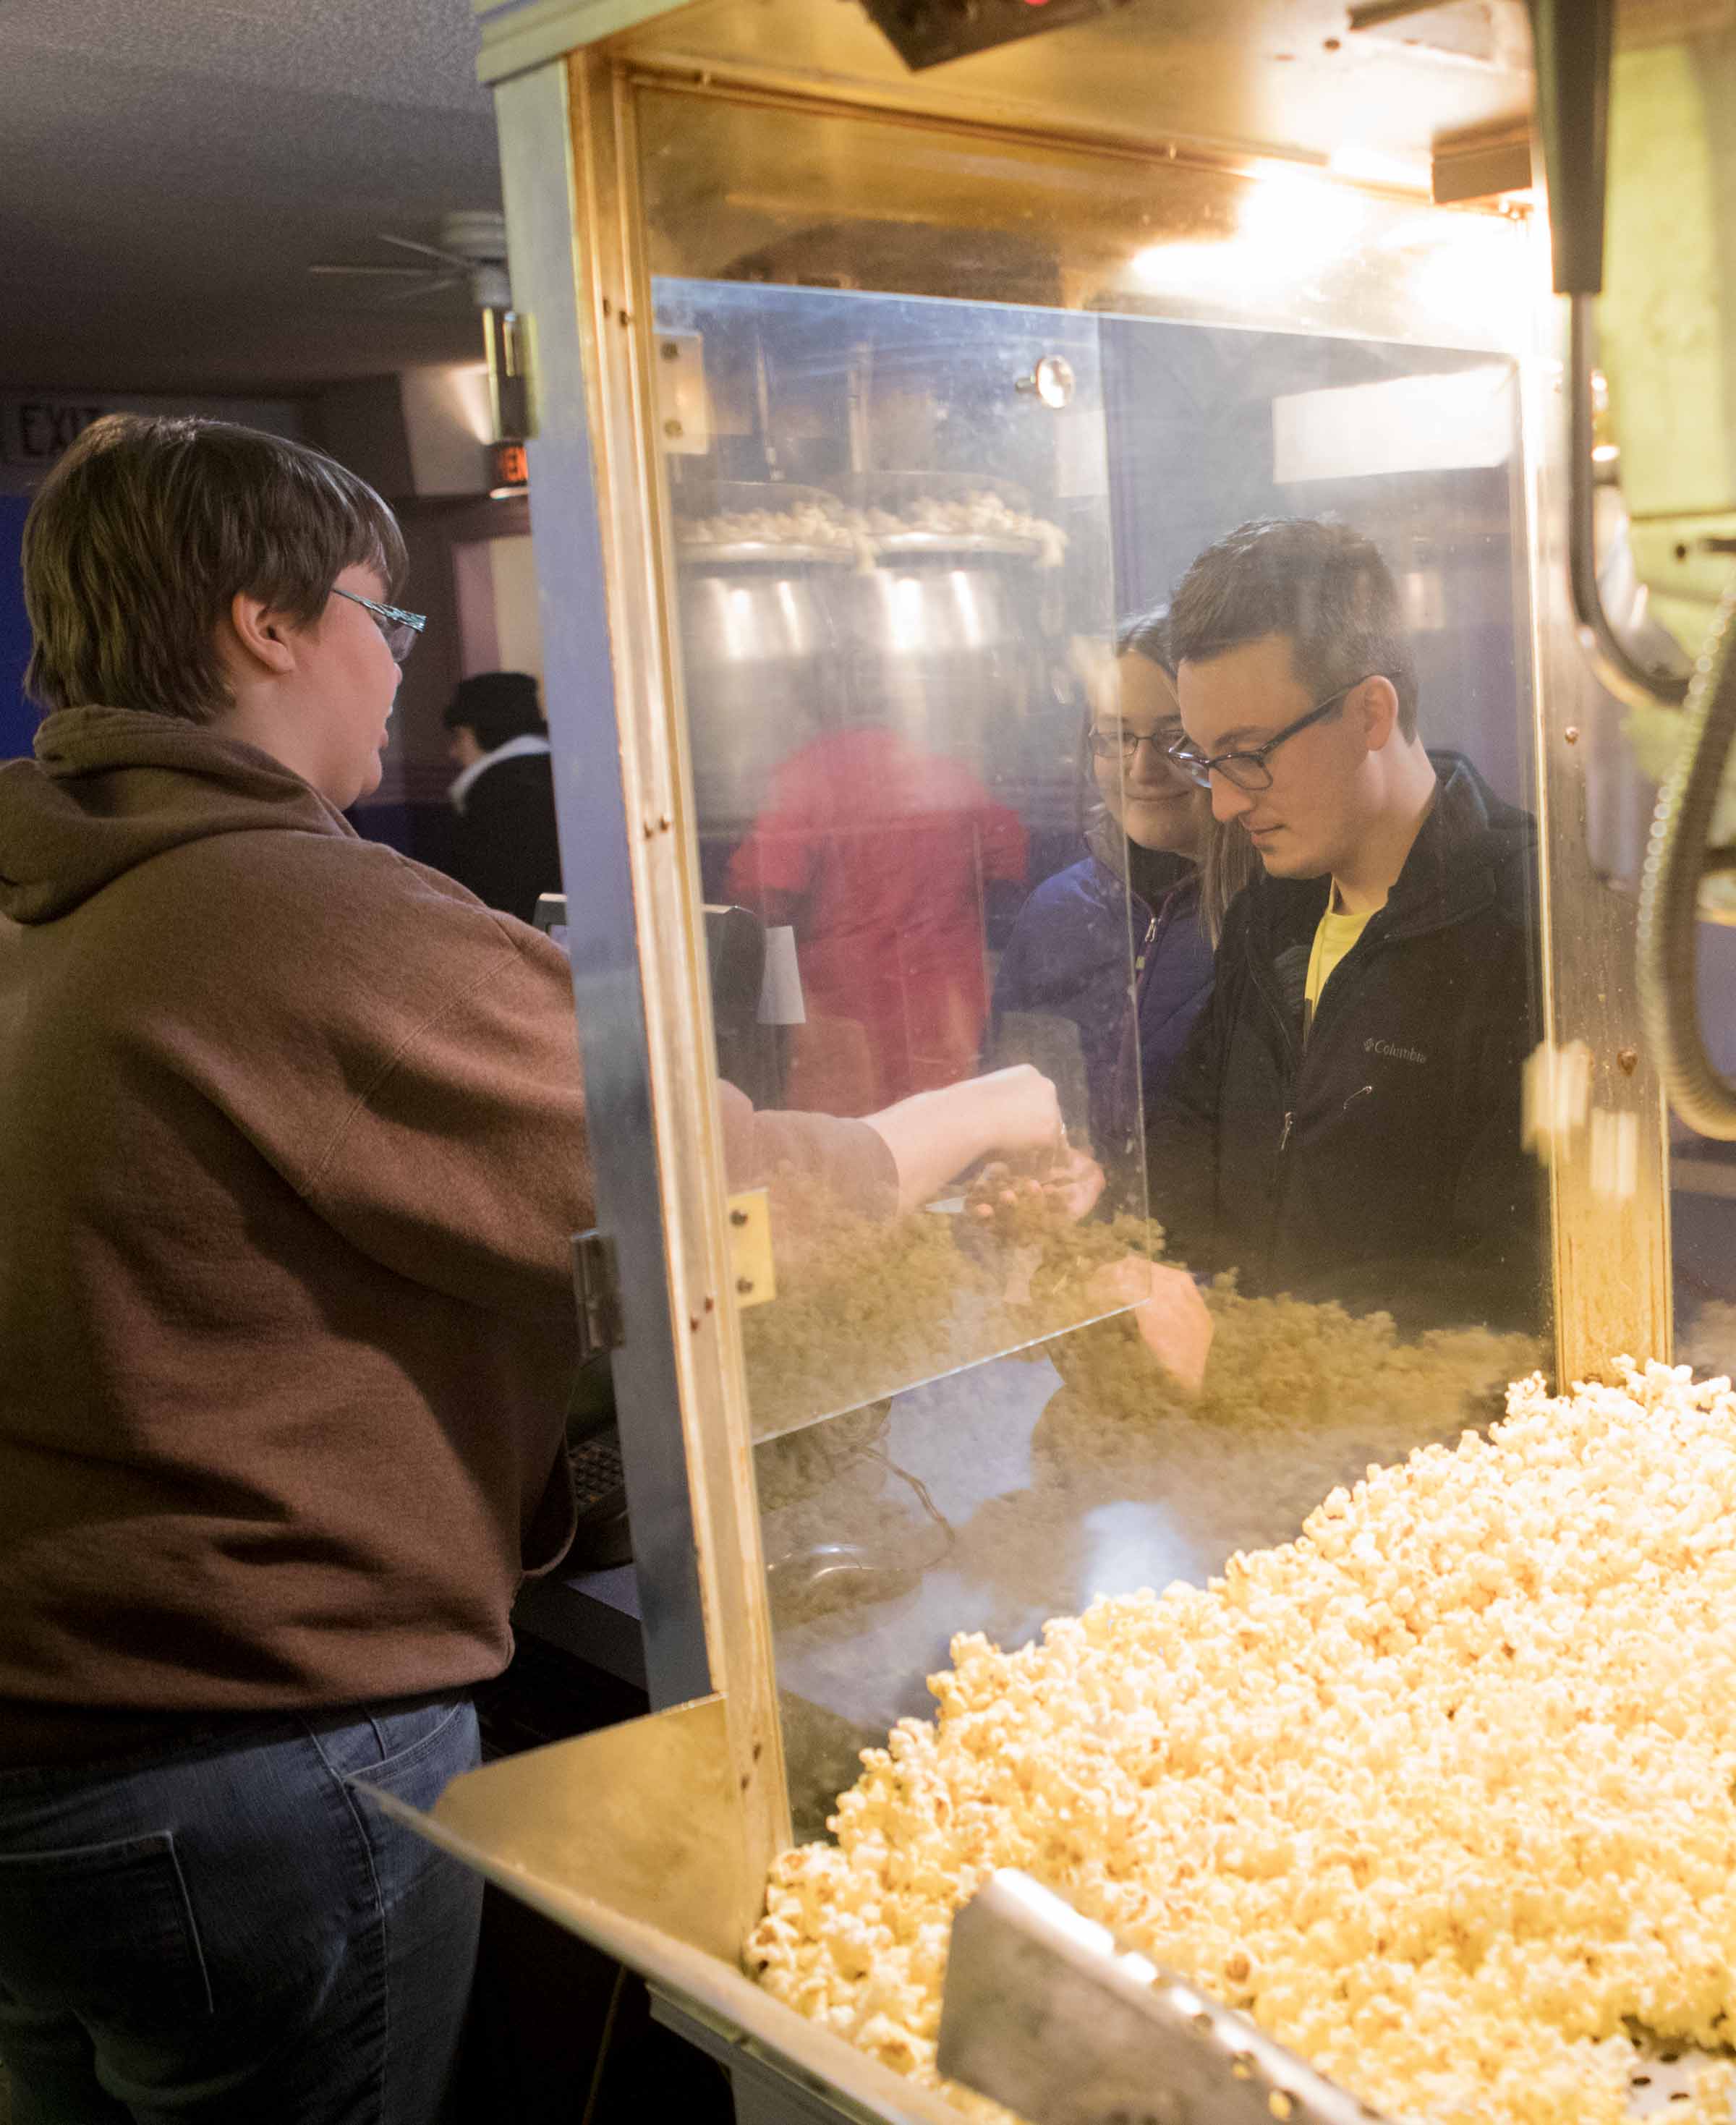 Fifth-year pharmacy student Caitlin Nahirniak and Andy Kremyar, a 2015 Ohio Northern University graduate, buy concessions before the start of a free screening of the movie “Friday Night Lights” at Ada Theatre.